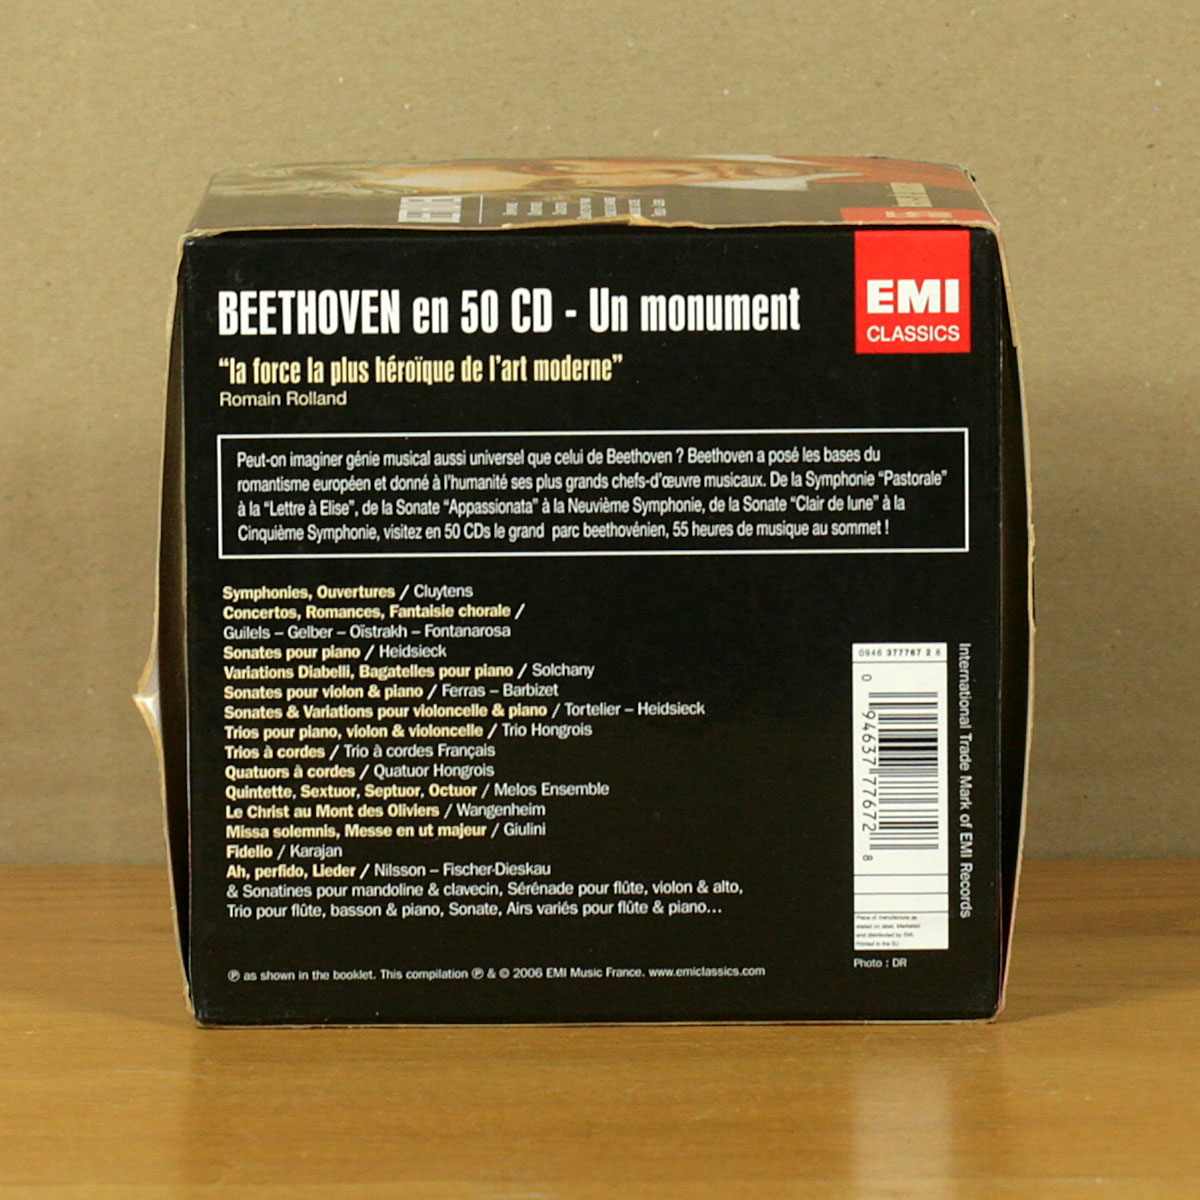 Masterpieces　•　Les　•　Meisterwerke　Alle　•　CD　Complete　chefs-d'œuvre　•　50　Beethoven　•